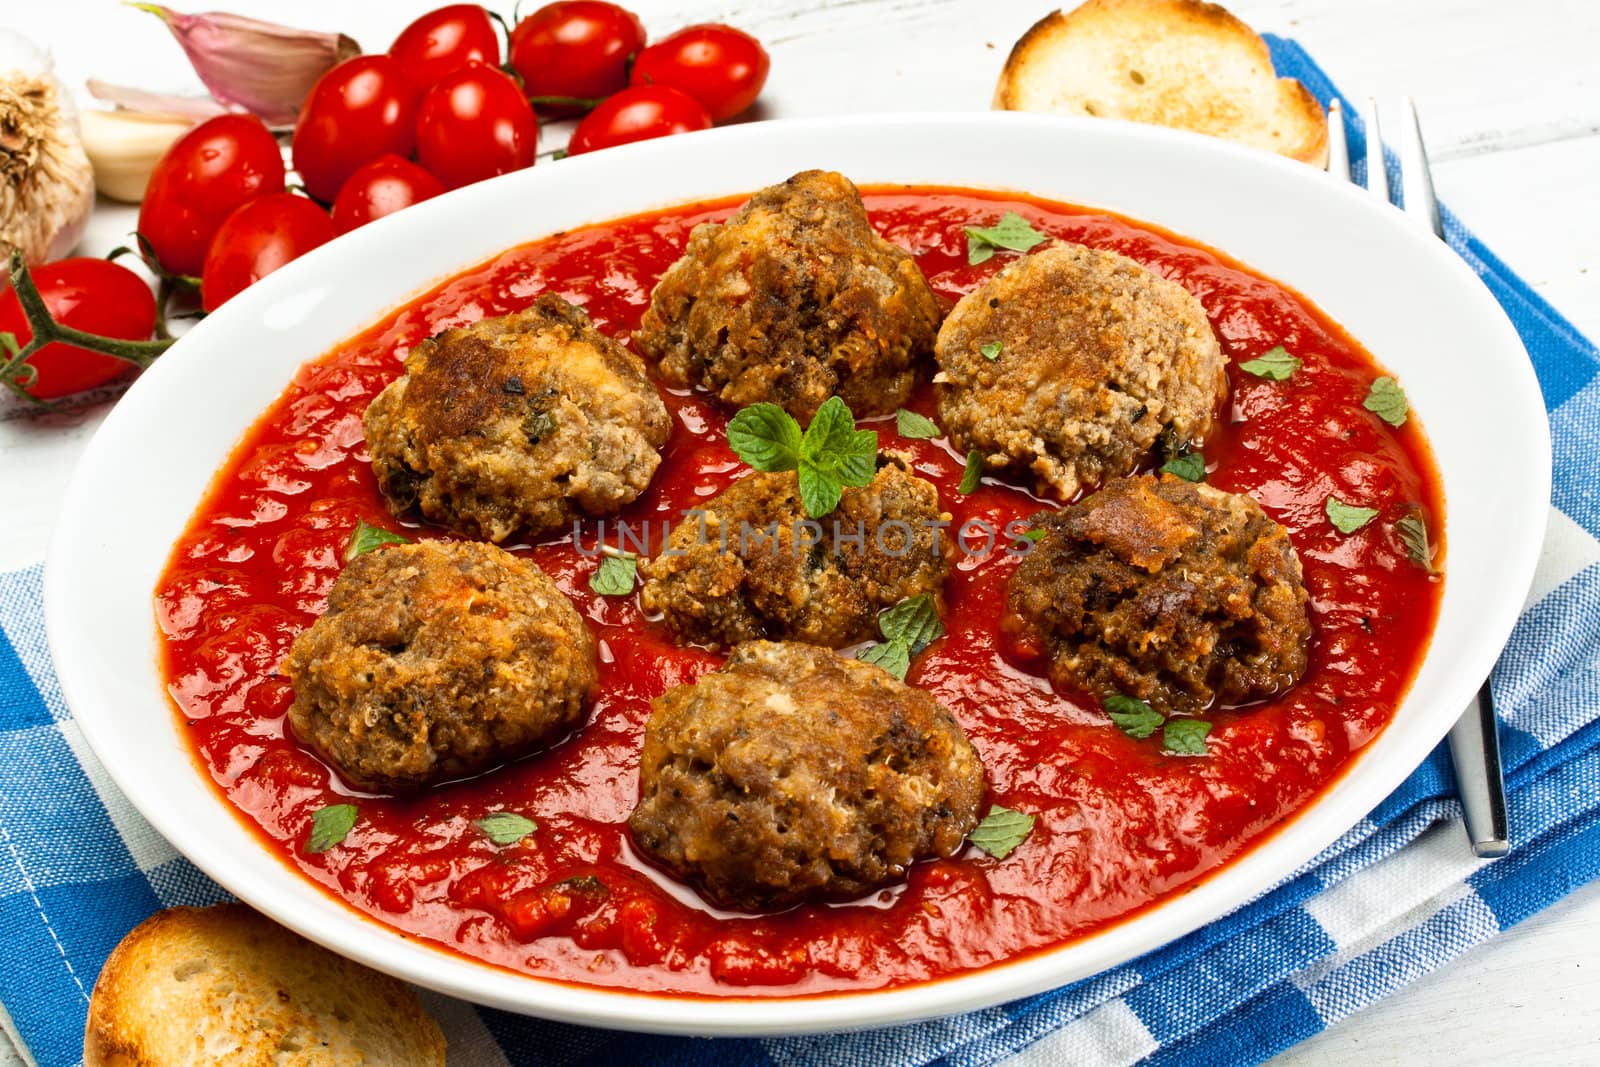 meatballs by maxg71